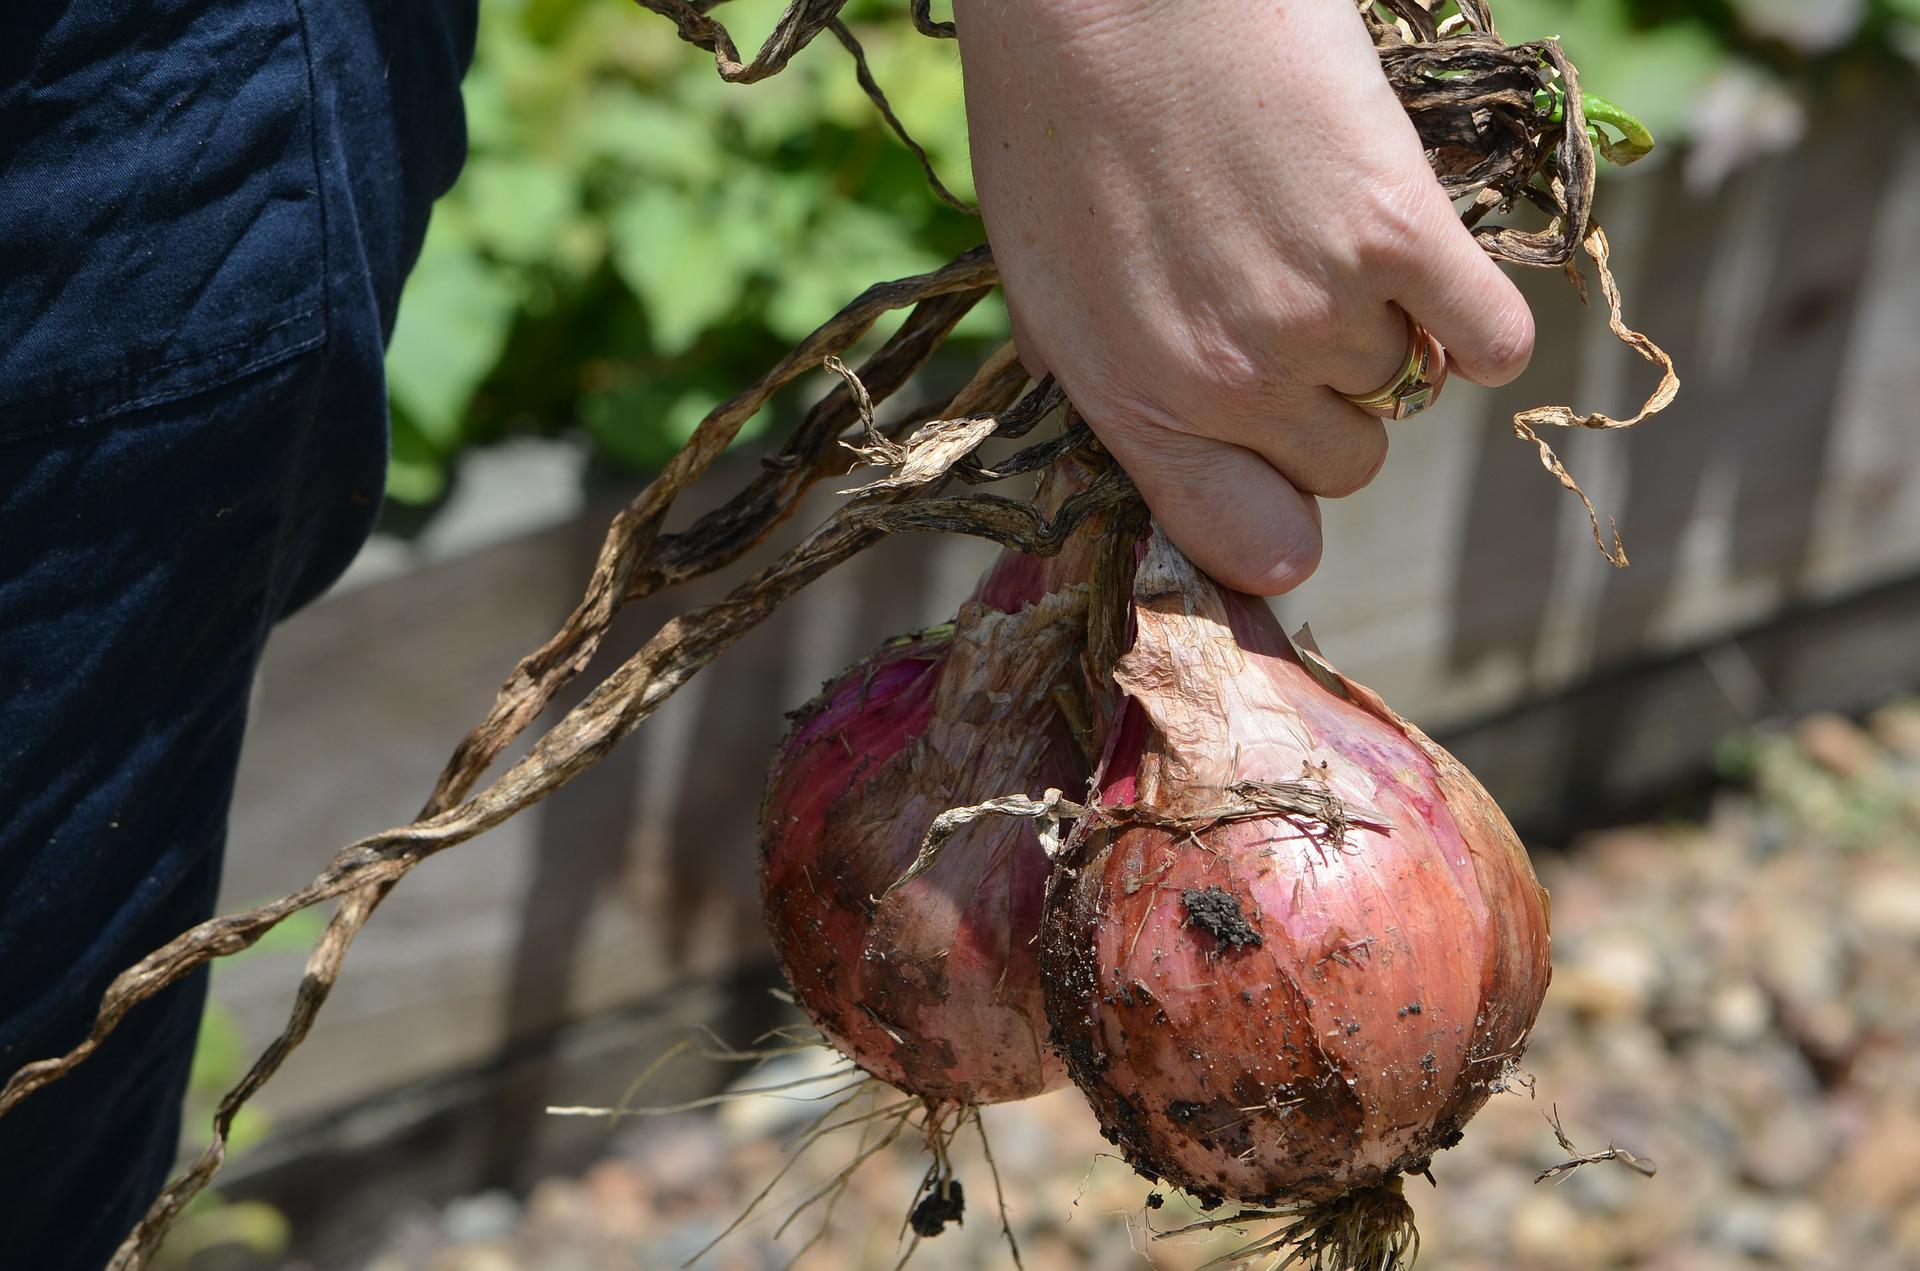 Woman holding two onions pulled from the garden.